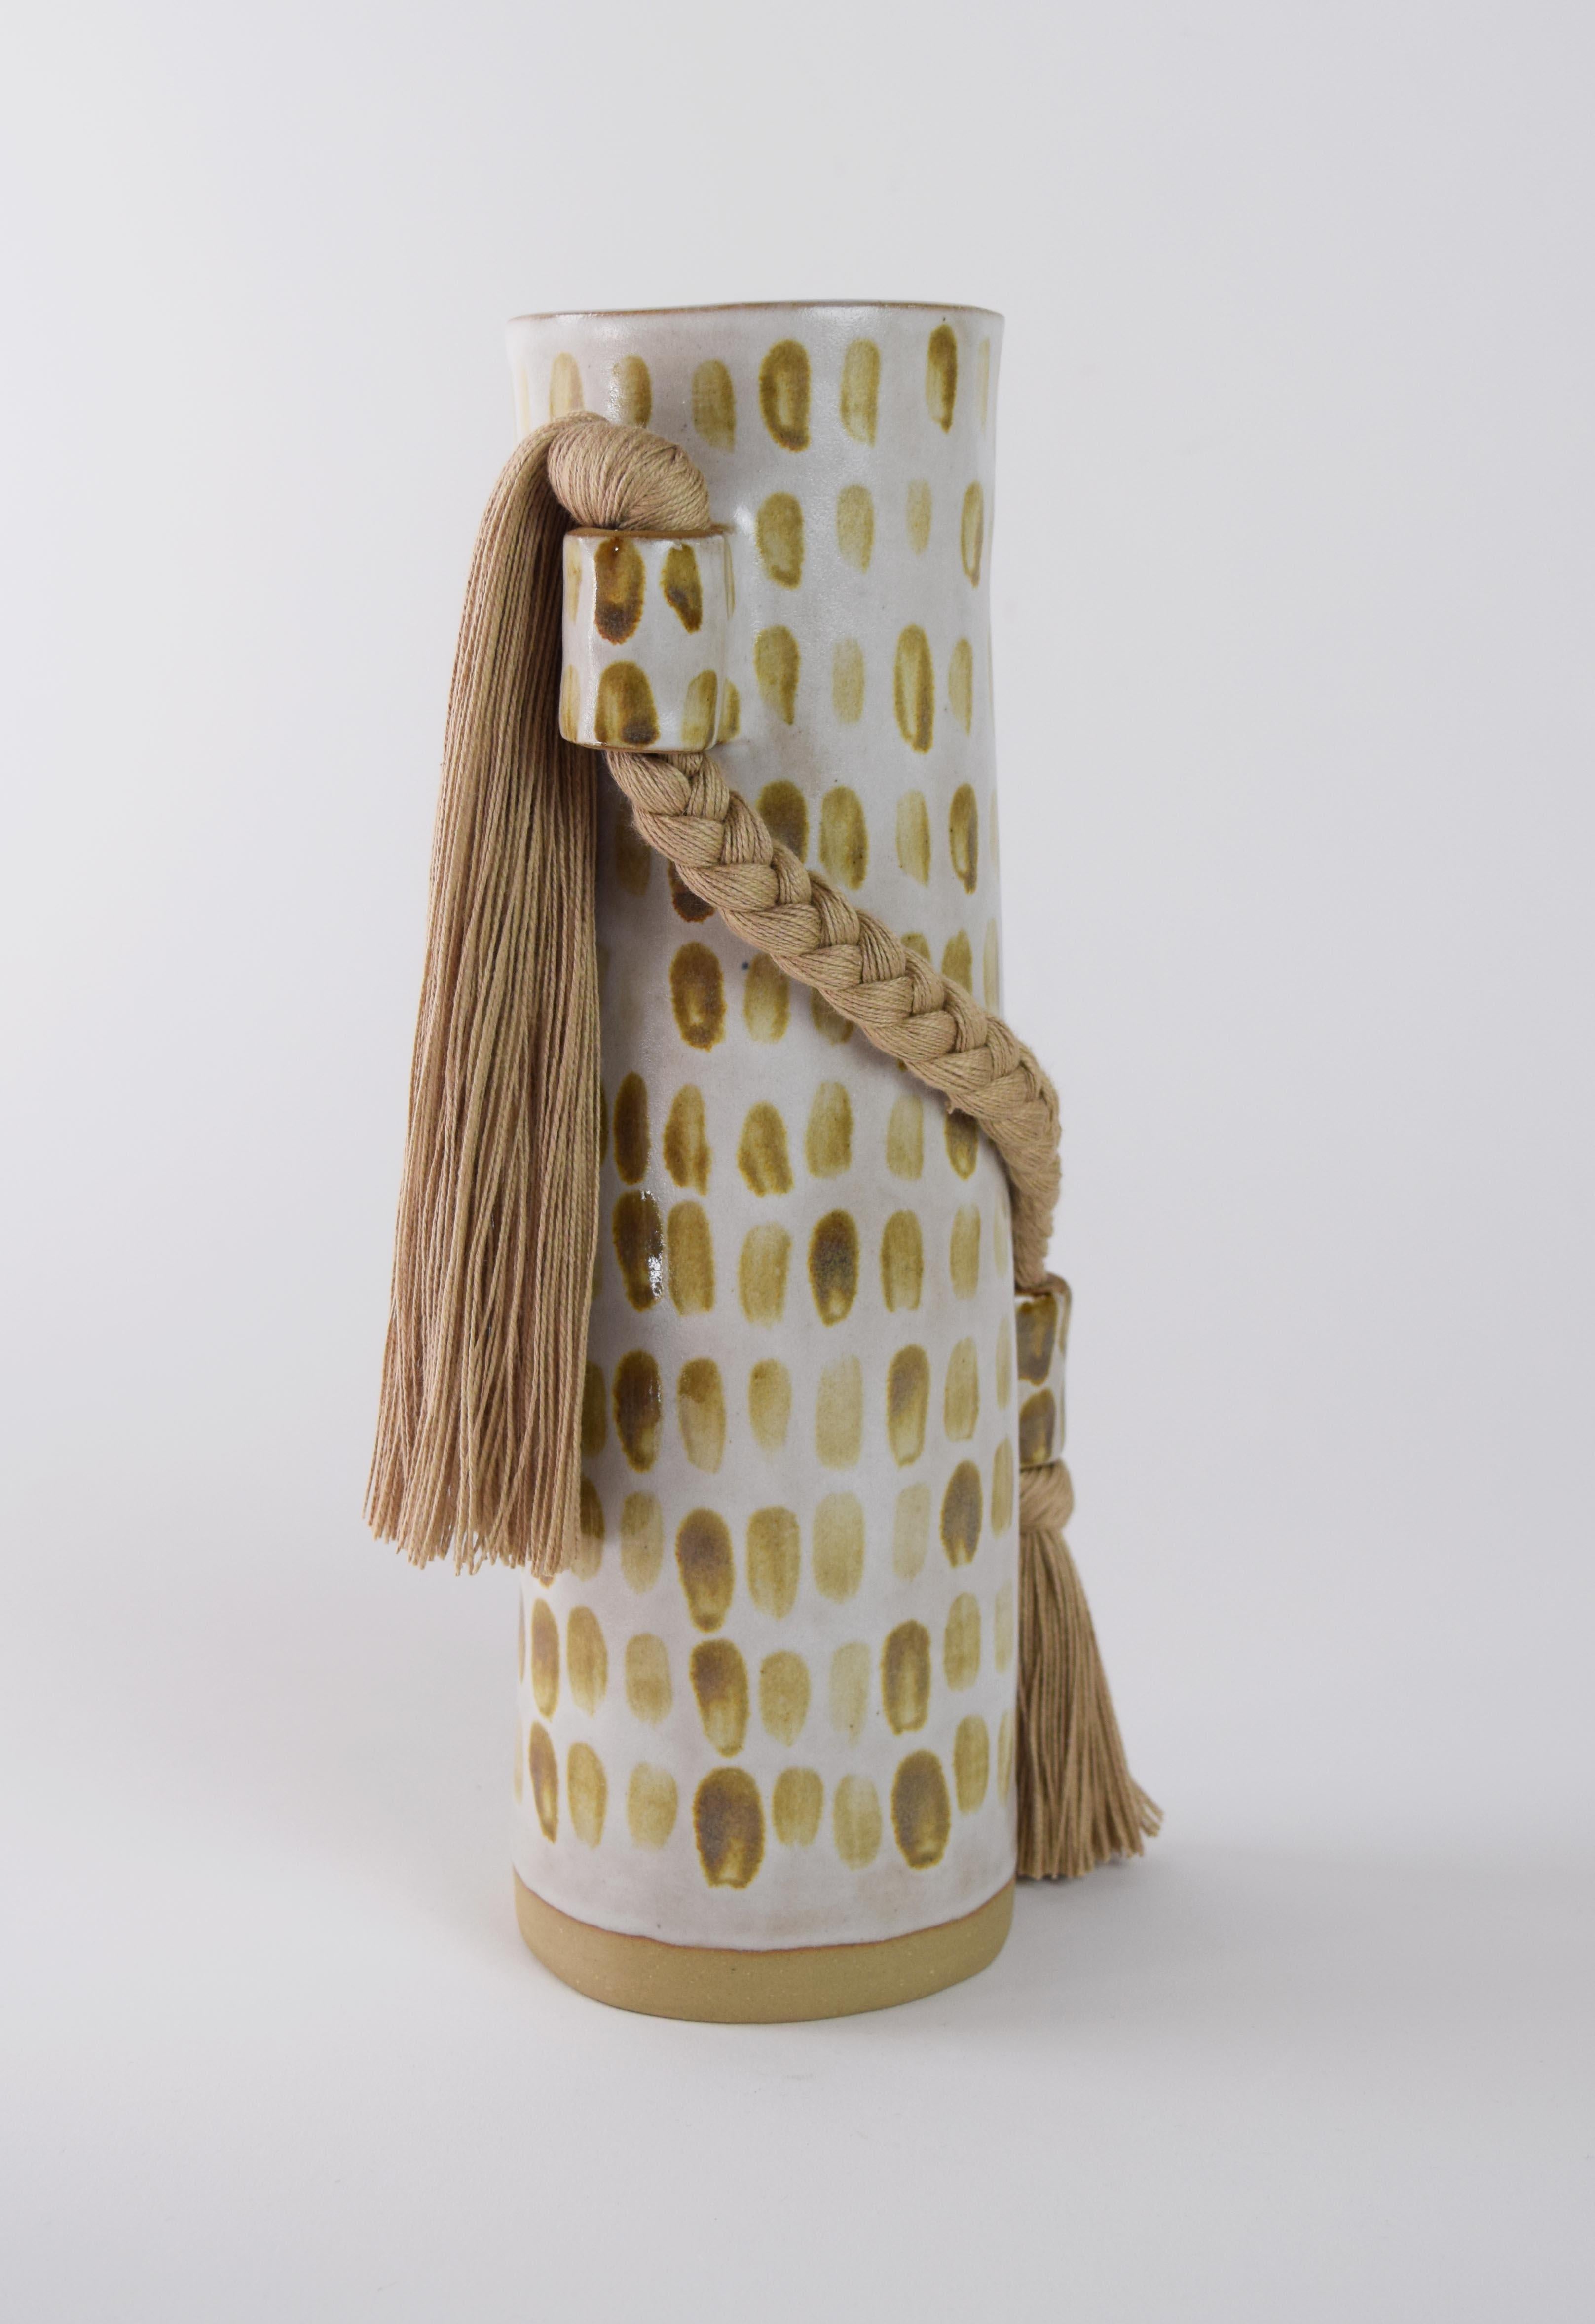 Hand-Crafted Limited Edition Handmade Vase #695, Dashed Beige on White with Tan Cotton Braid